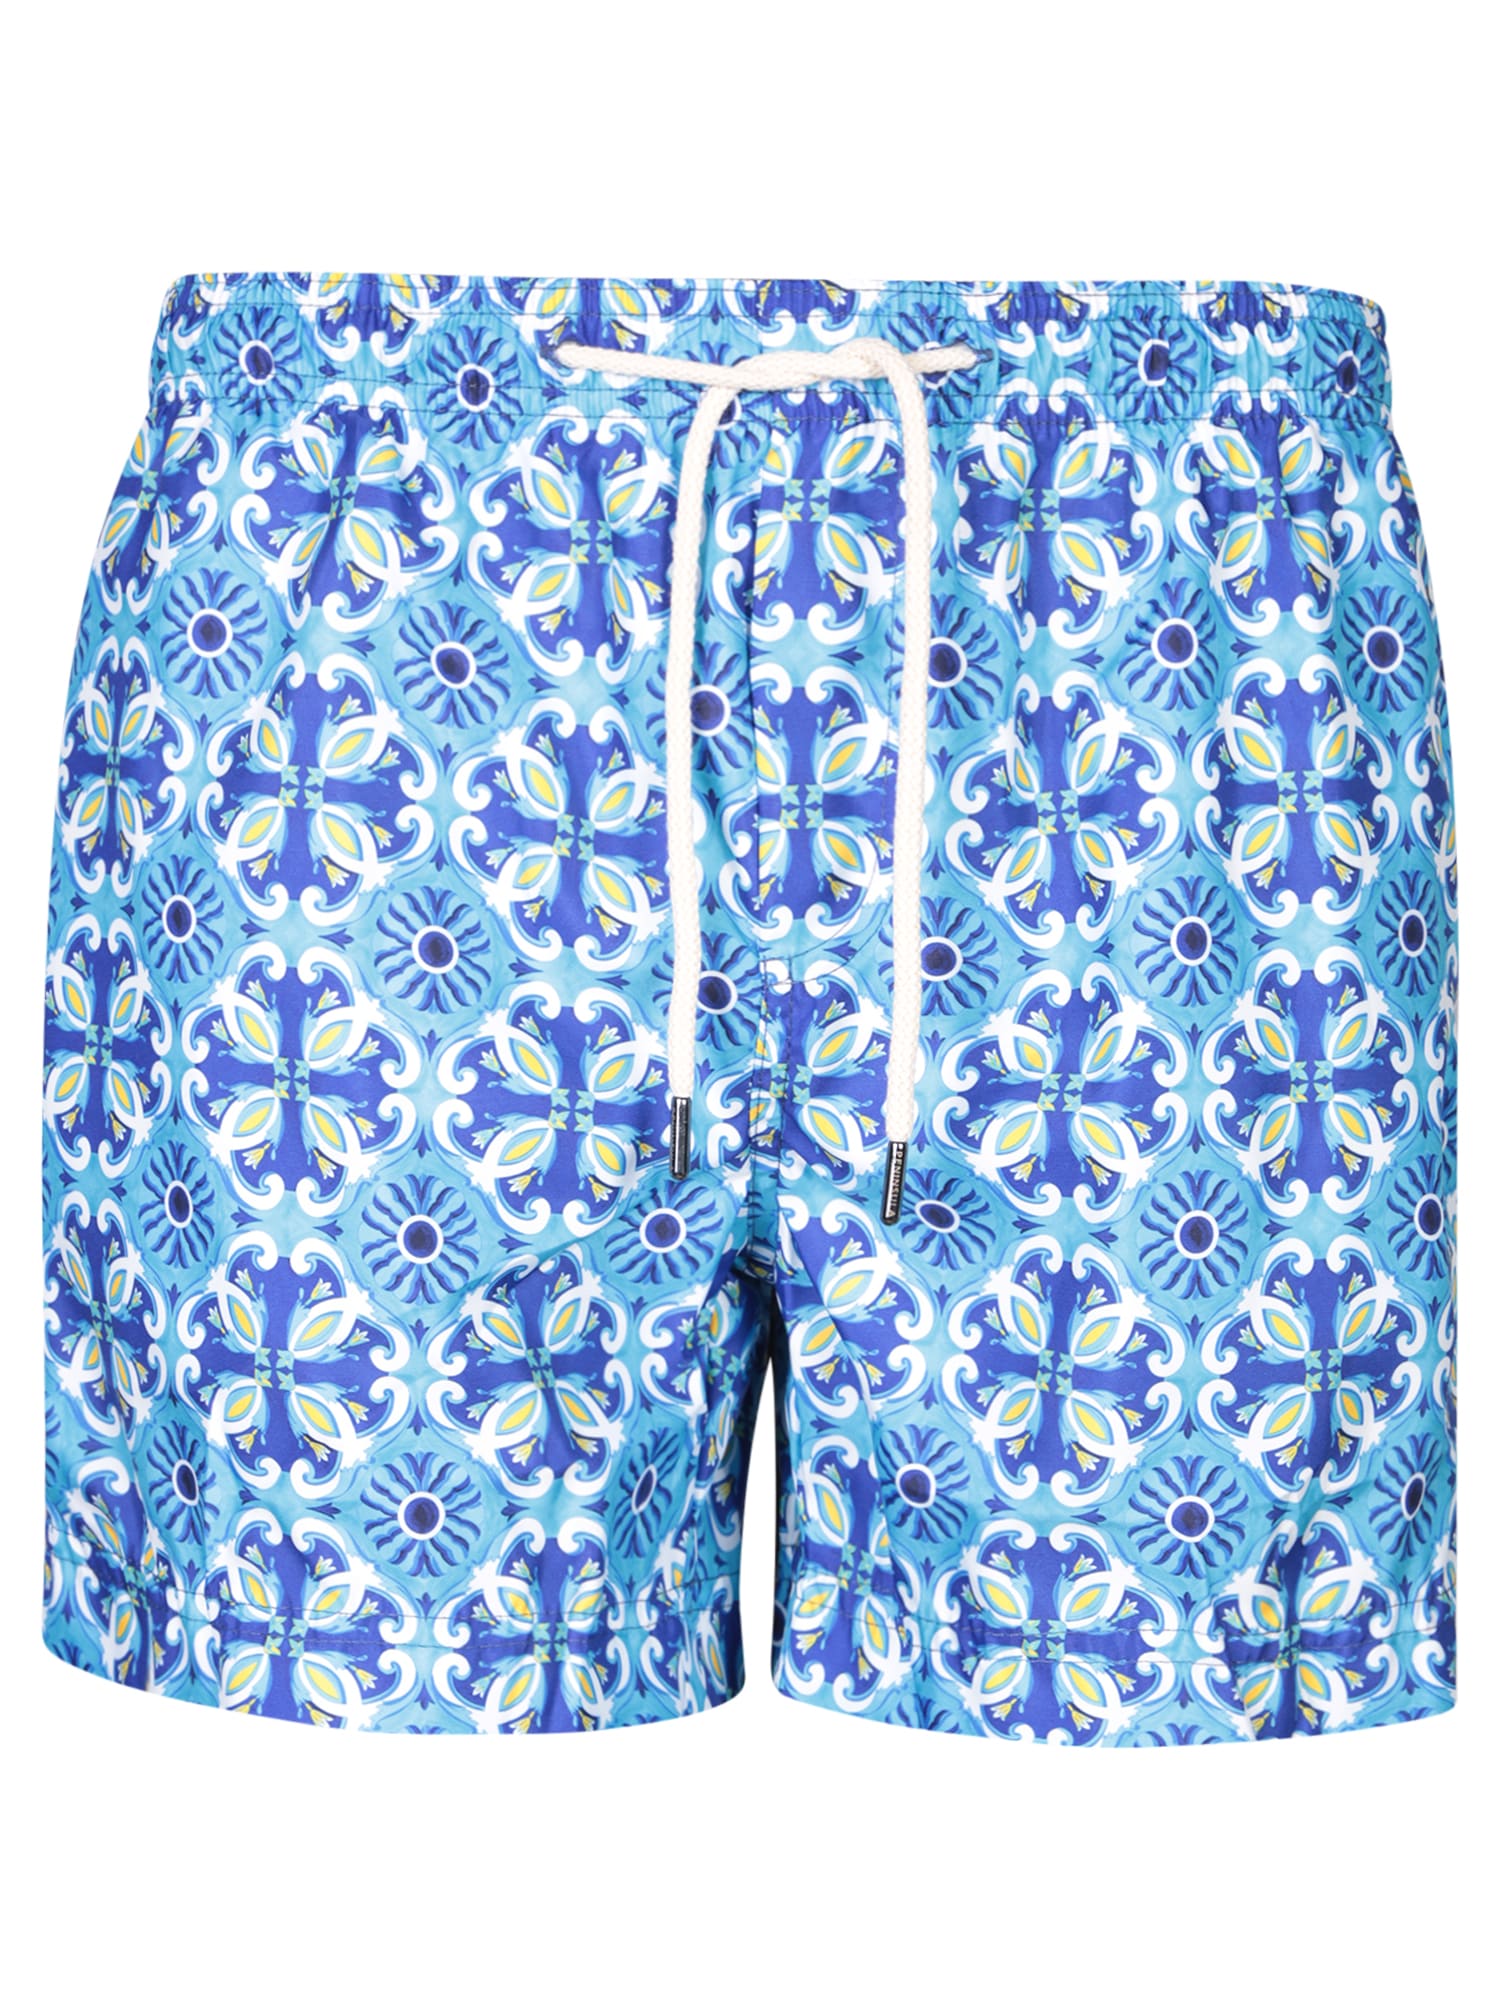 Patterned Swim Shorts In Blue/yellow